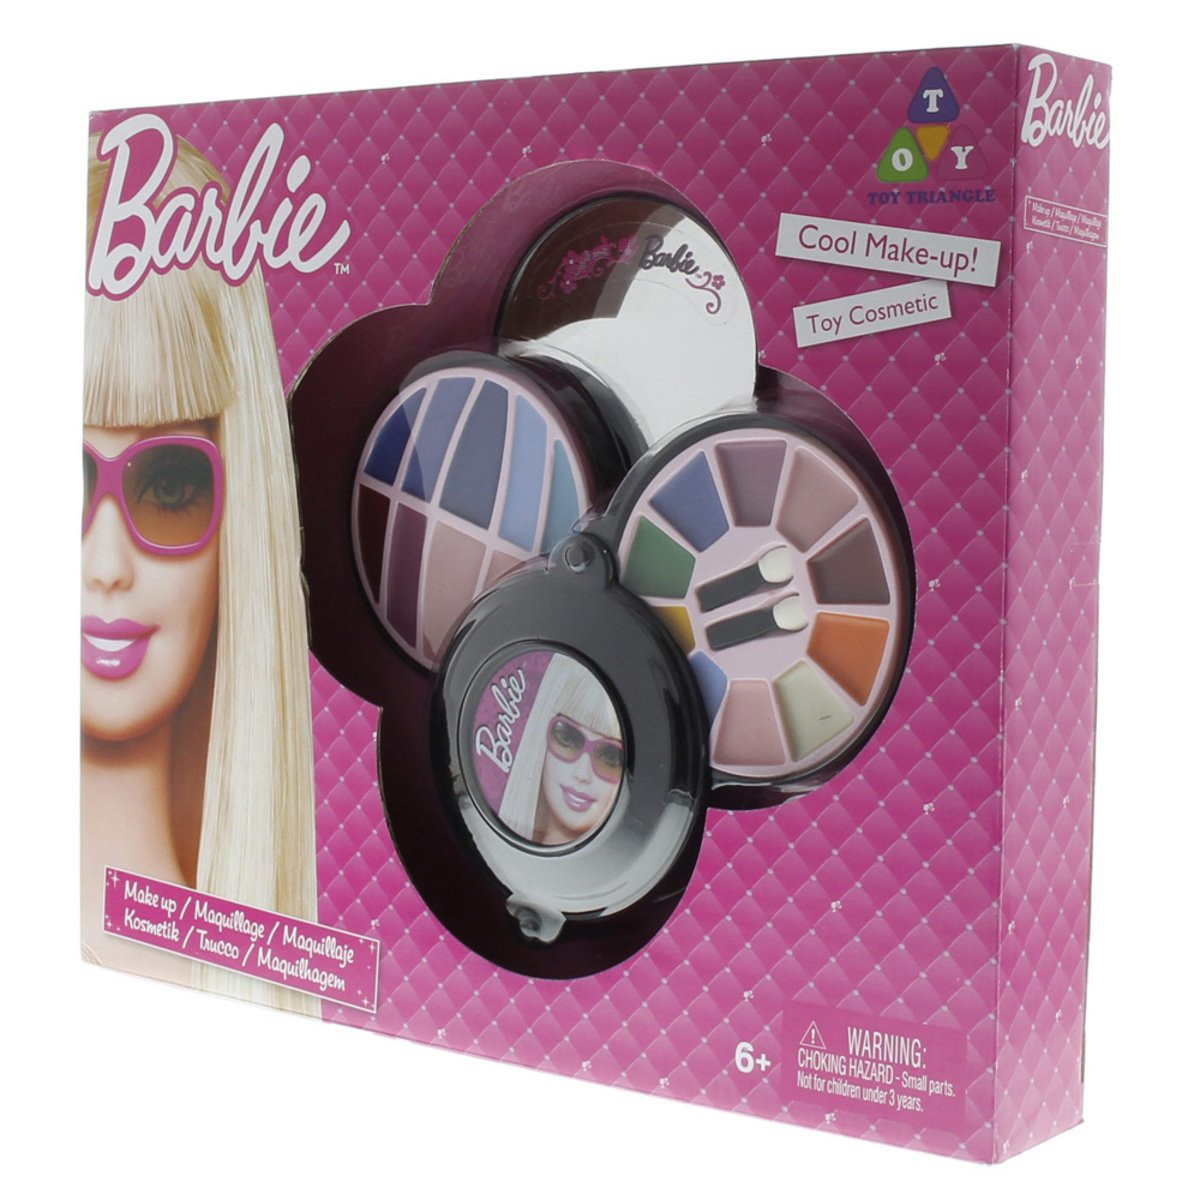 Barbie Cool Make up Toy Cosmetic Online at Best Price | Girls Toys ...